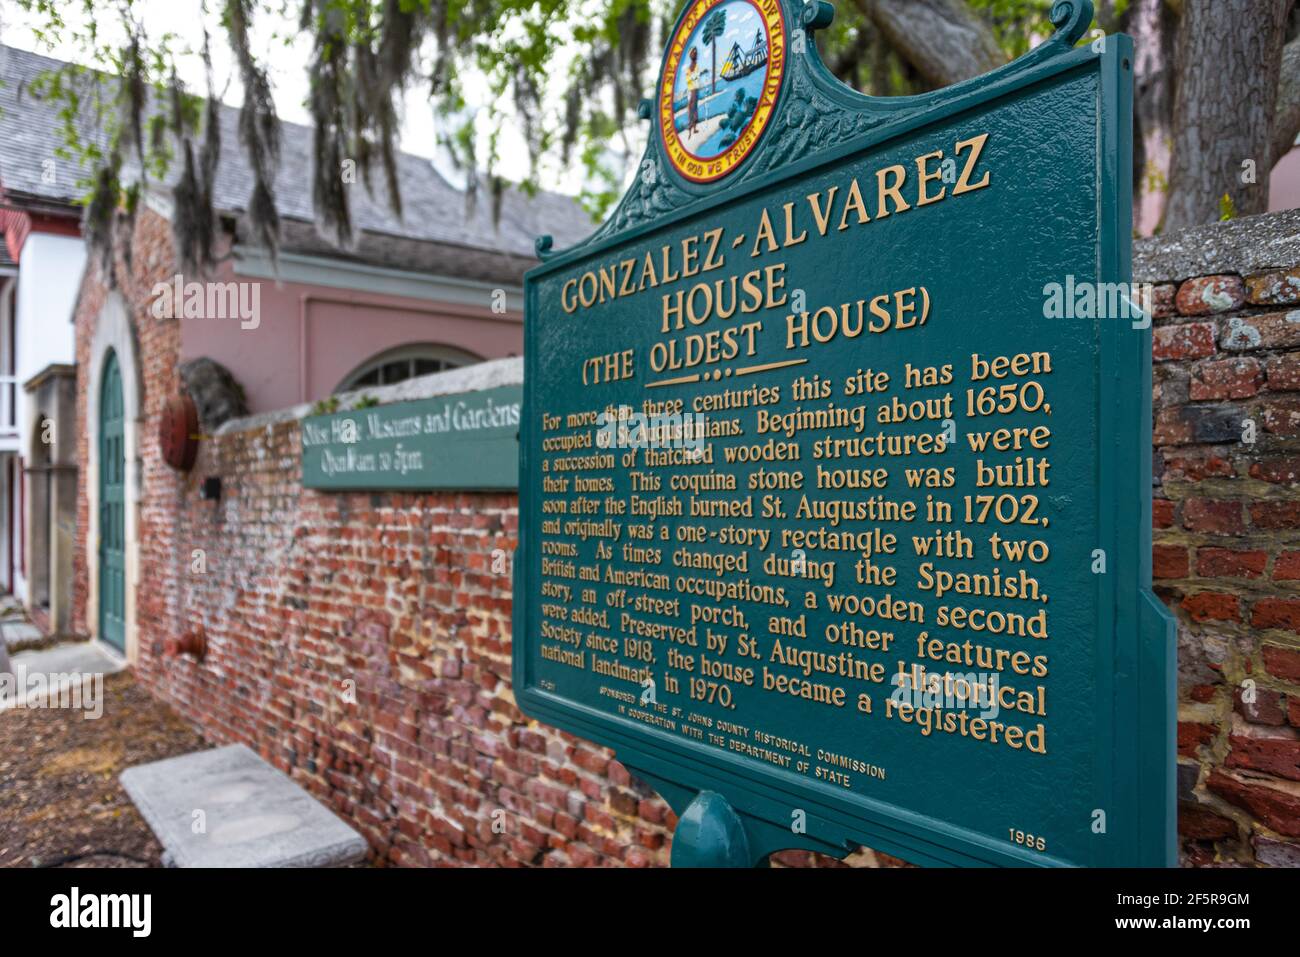 The Gonzalez-Alverez House (The Oldest House) is a historic landmark in St. Augustine, FL, with original construction dating back to about 1723. (USA) Stock Photo